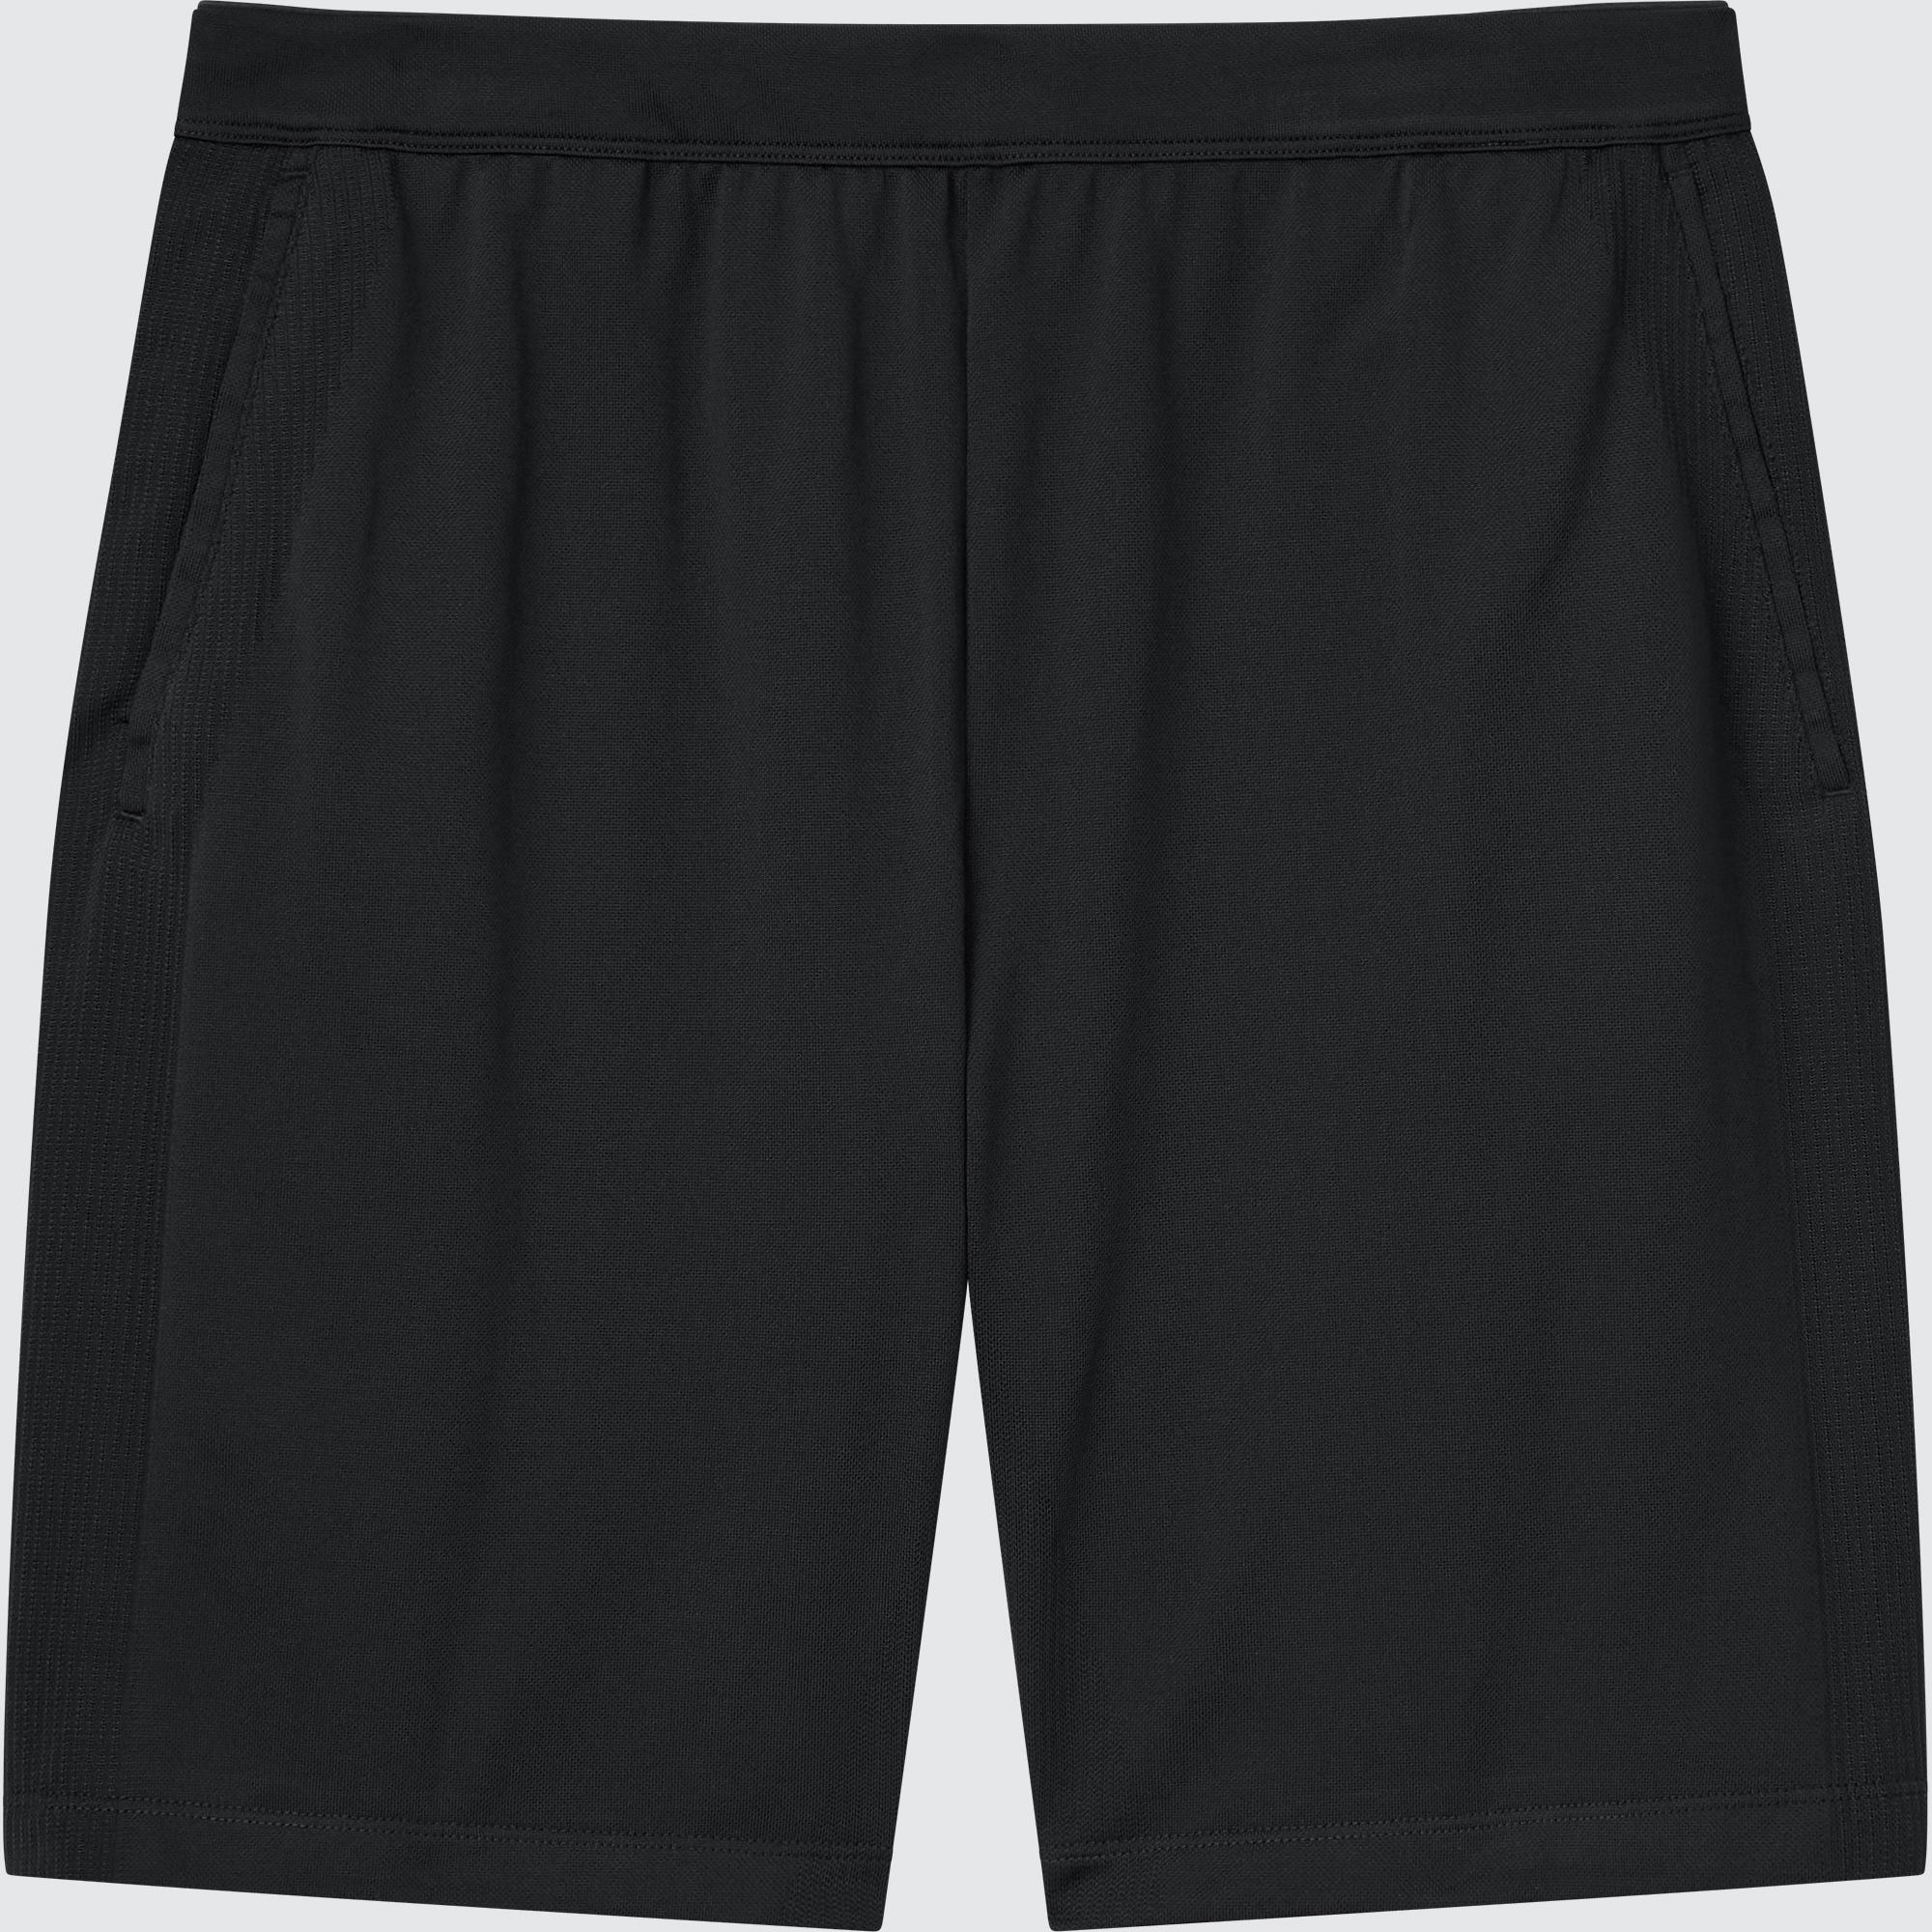 Uniqlo Ultra Stretch Active Shorts 7 Stylehint